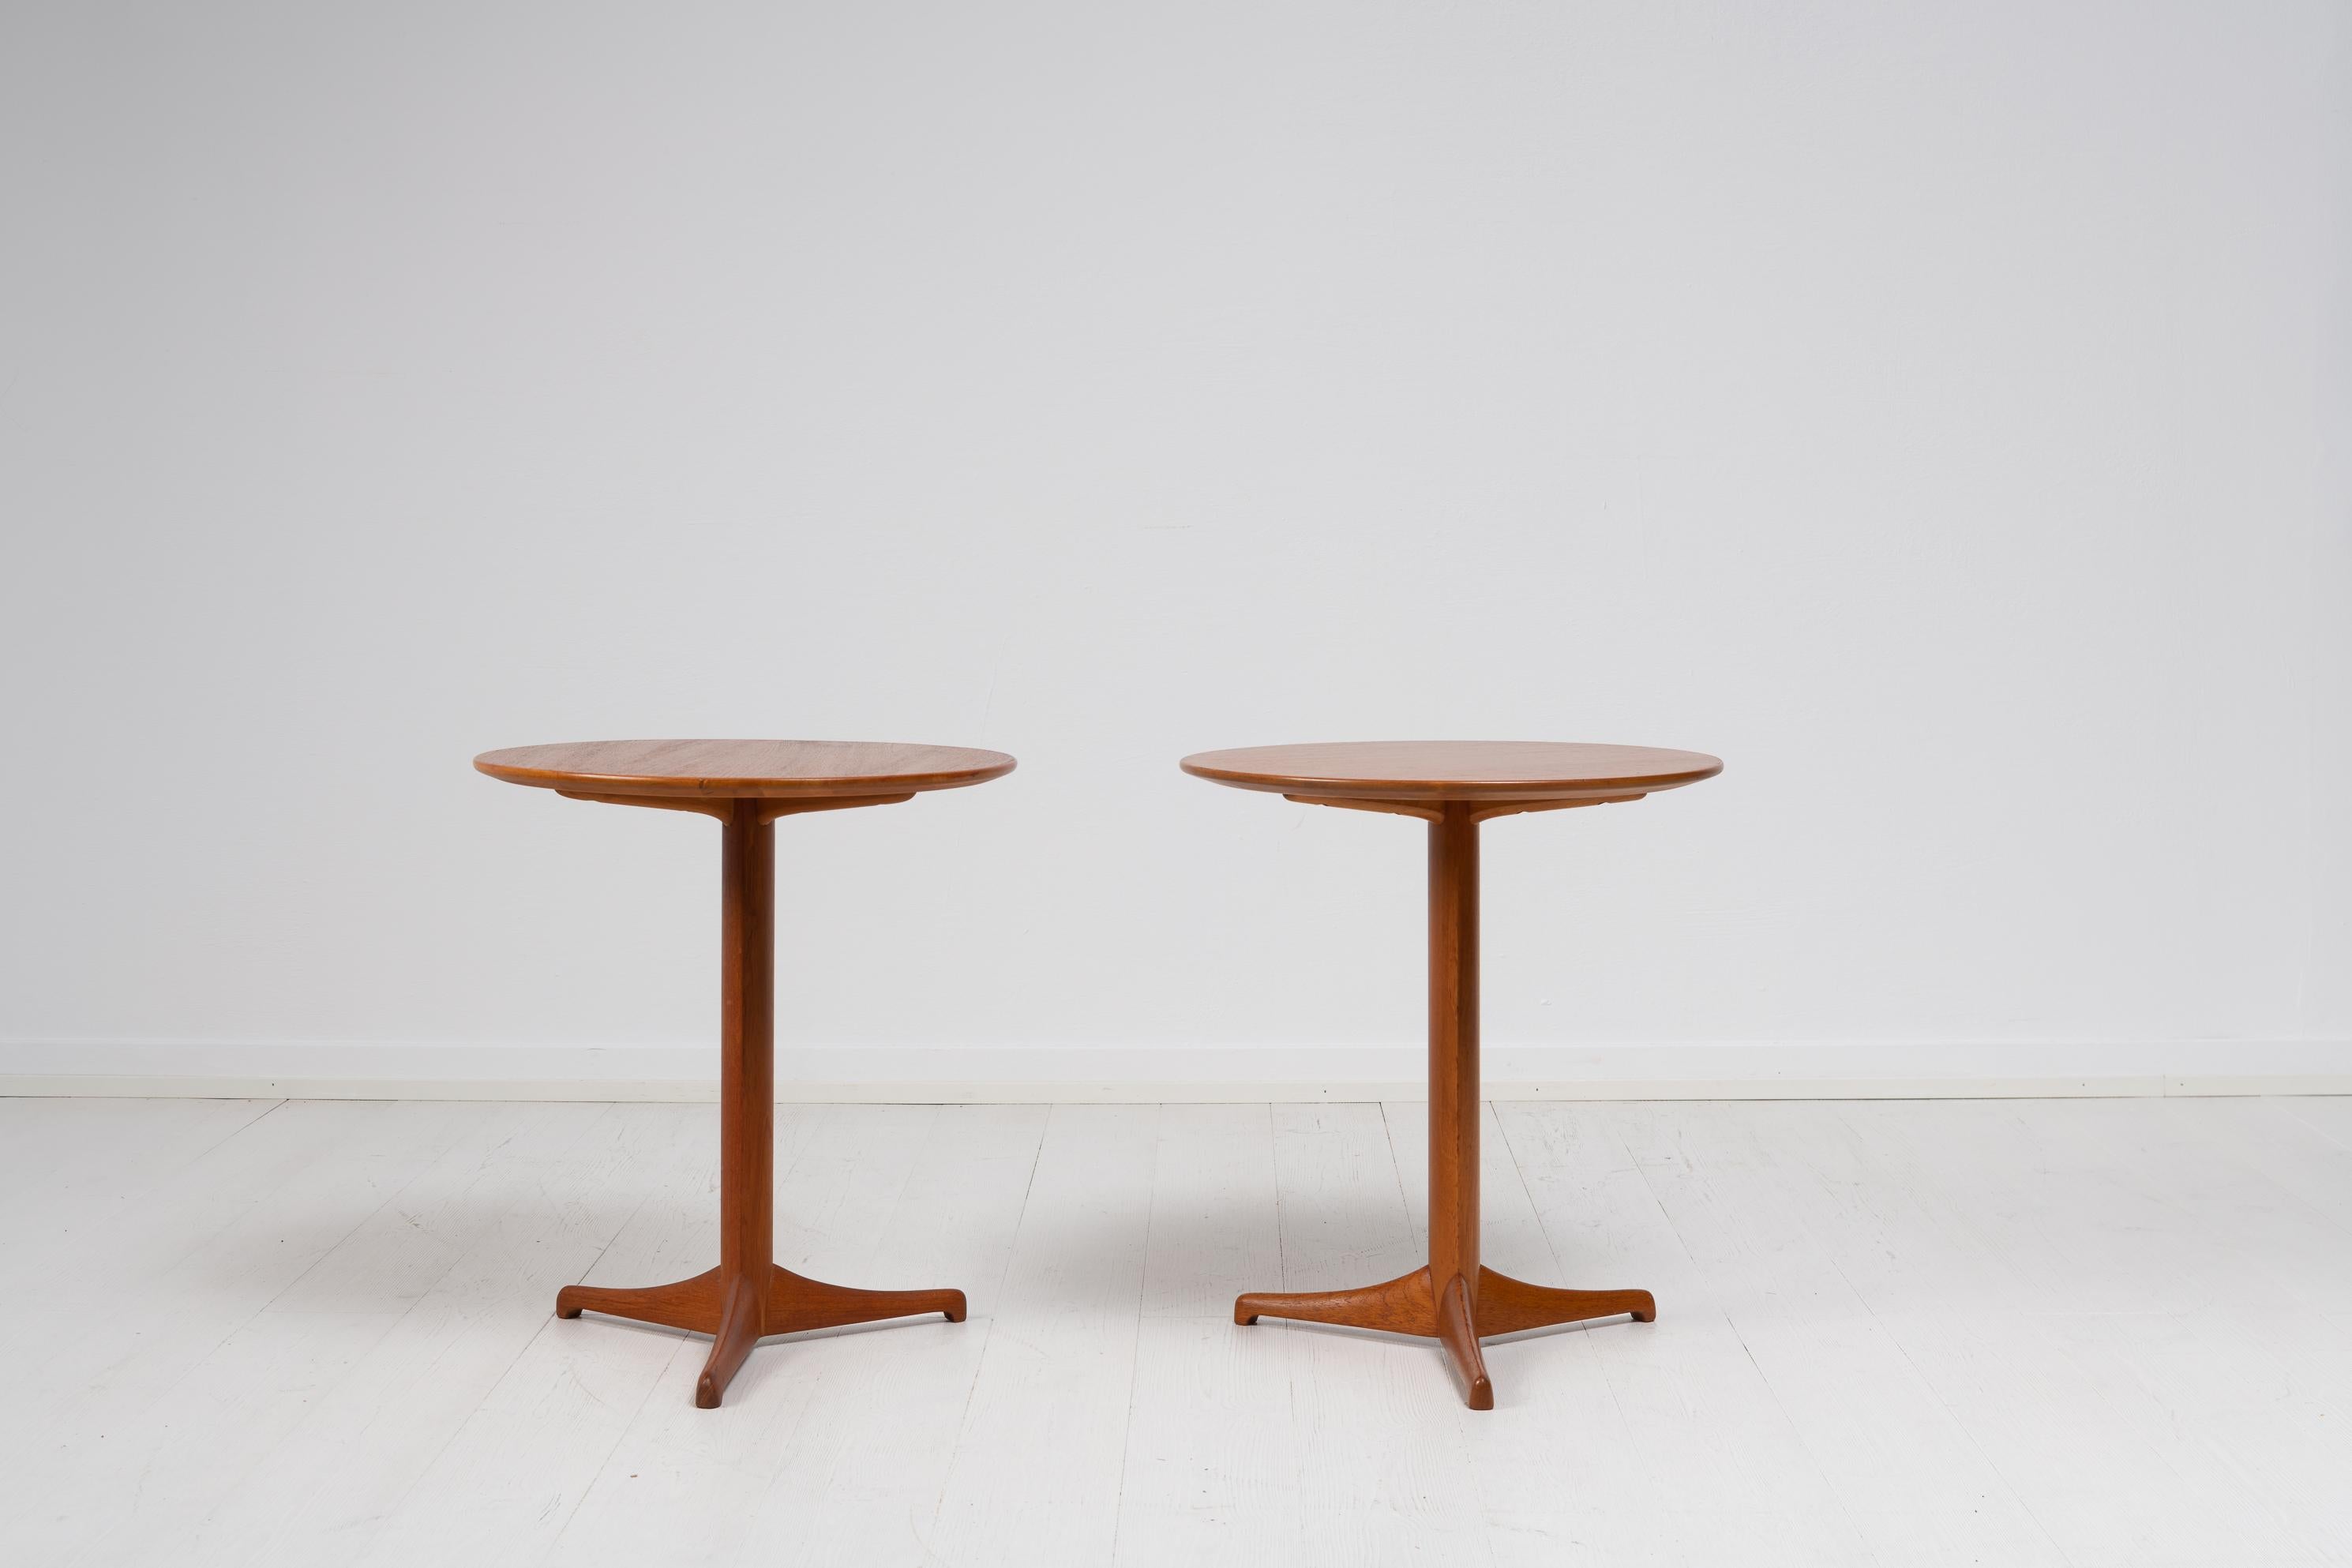 Pair of Scandinavian modern teak tables from Sweden. The tables are known as 